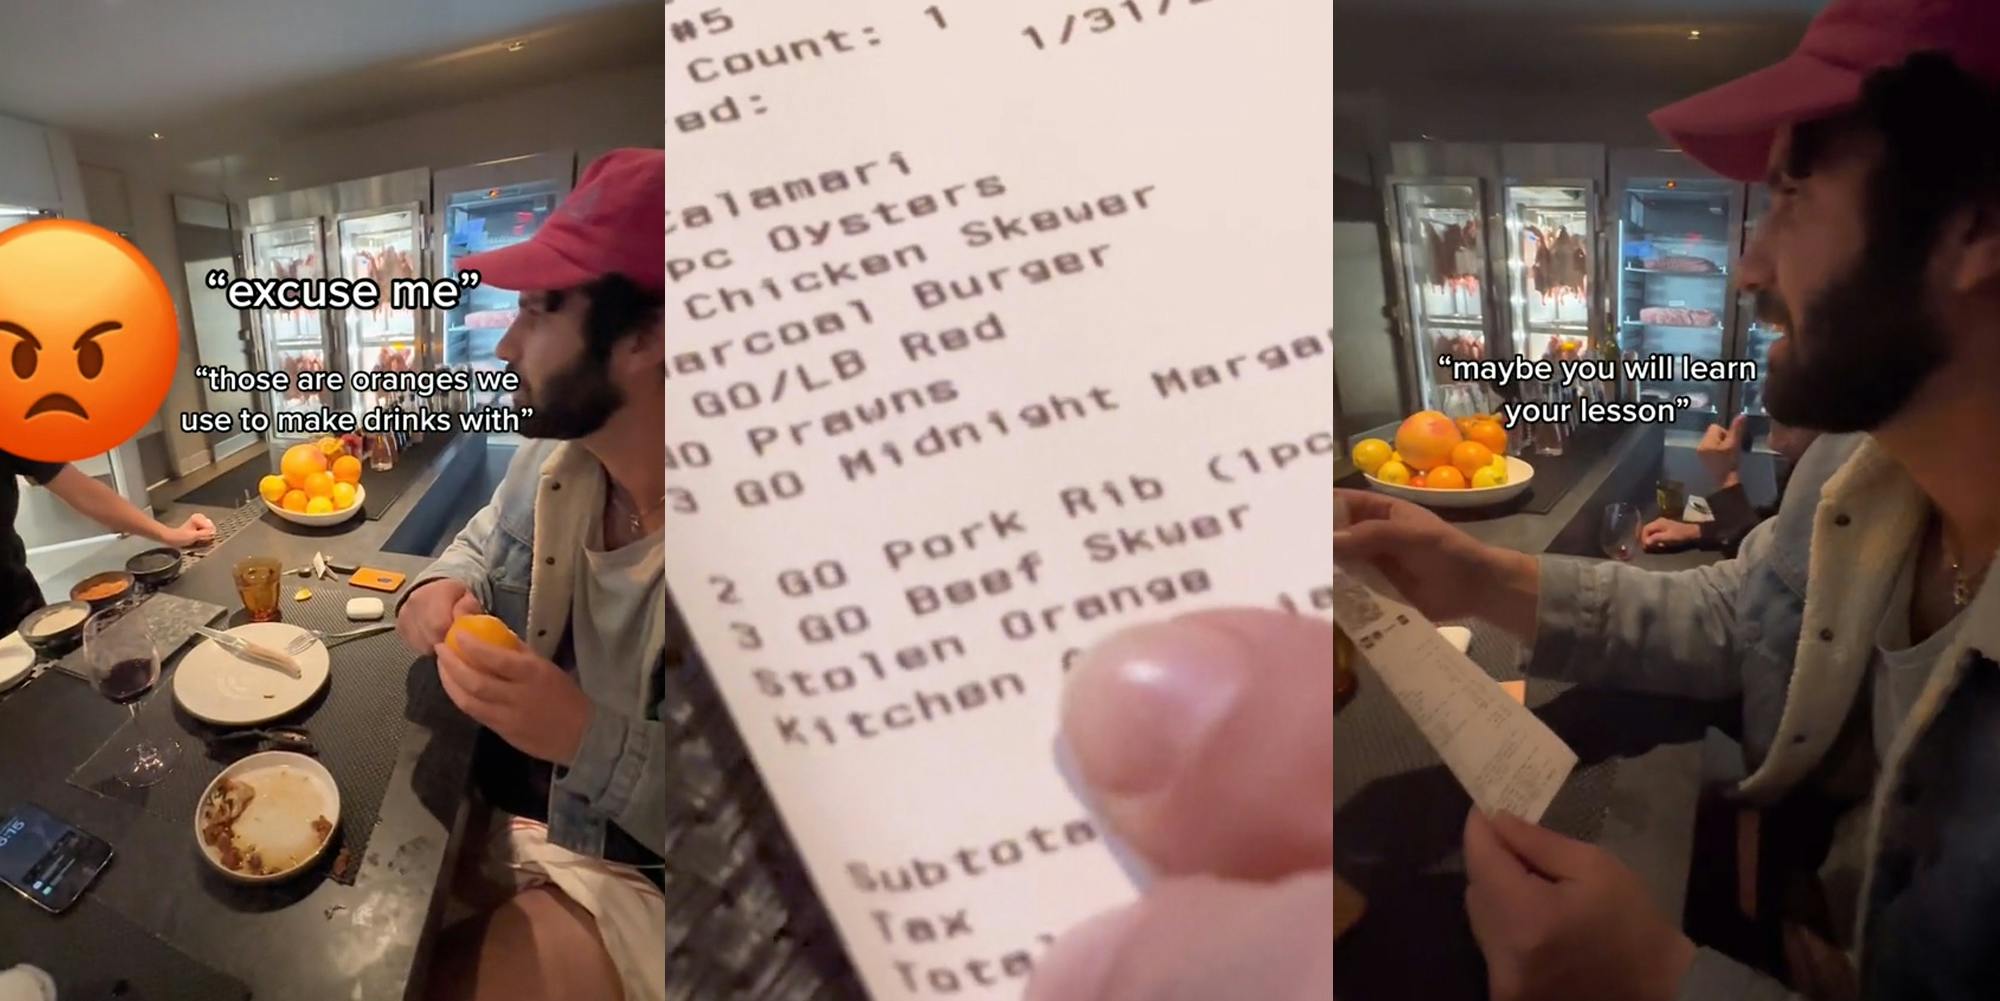 man eating orange from bowl on table as server puts hand out with caption ""excuse me"" ""those are oranges we use to make drinks with"" (l) bill with "stolen orange" on it (c) man holding receipt with mouth open with caption ""maybe you will learn your lesson"" (r)